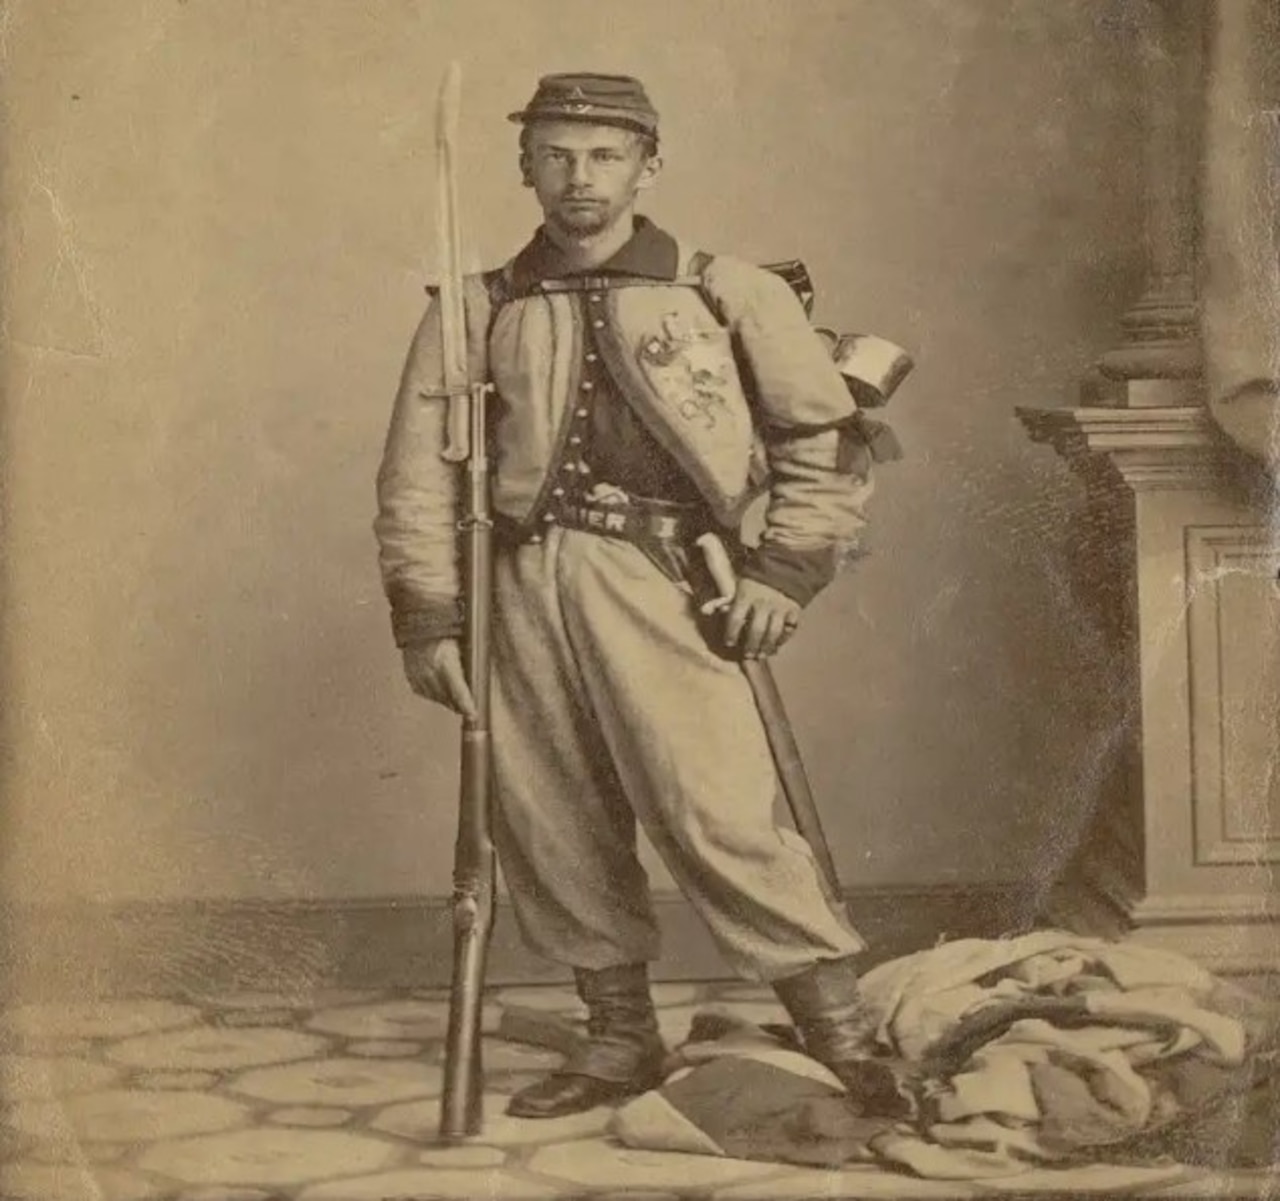 A man wearing a uniform stands while holding a rifle with bayonet.